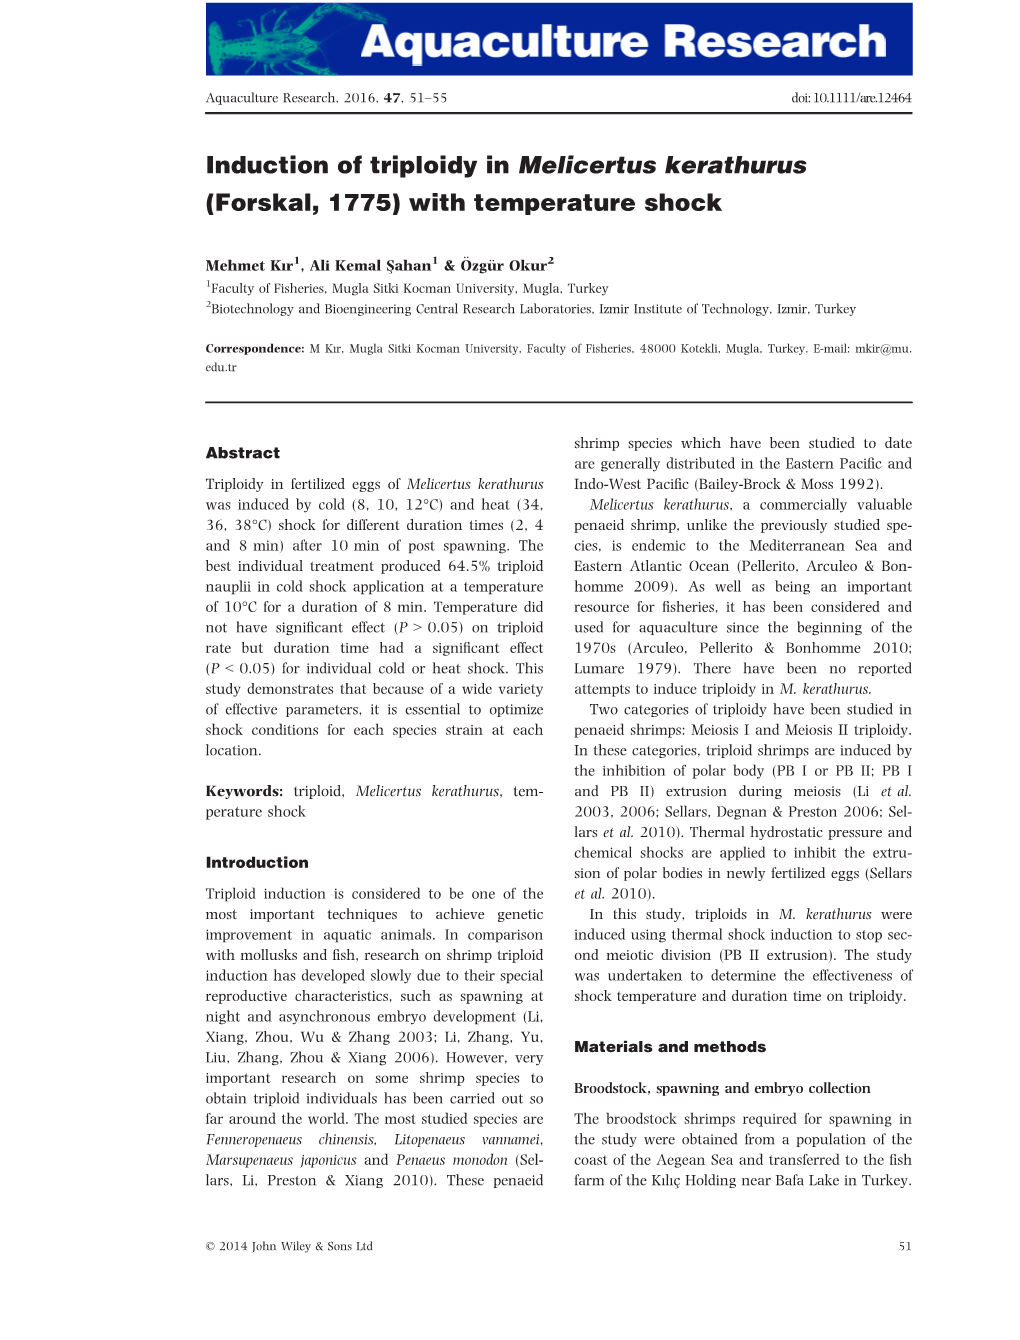 Induction of Triploidy in Melicertus Kerathurus (Forskal, 1775) with Temperature Shock